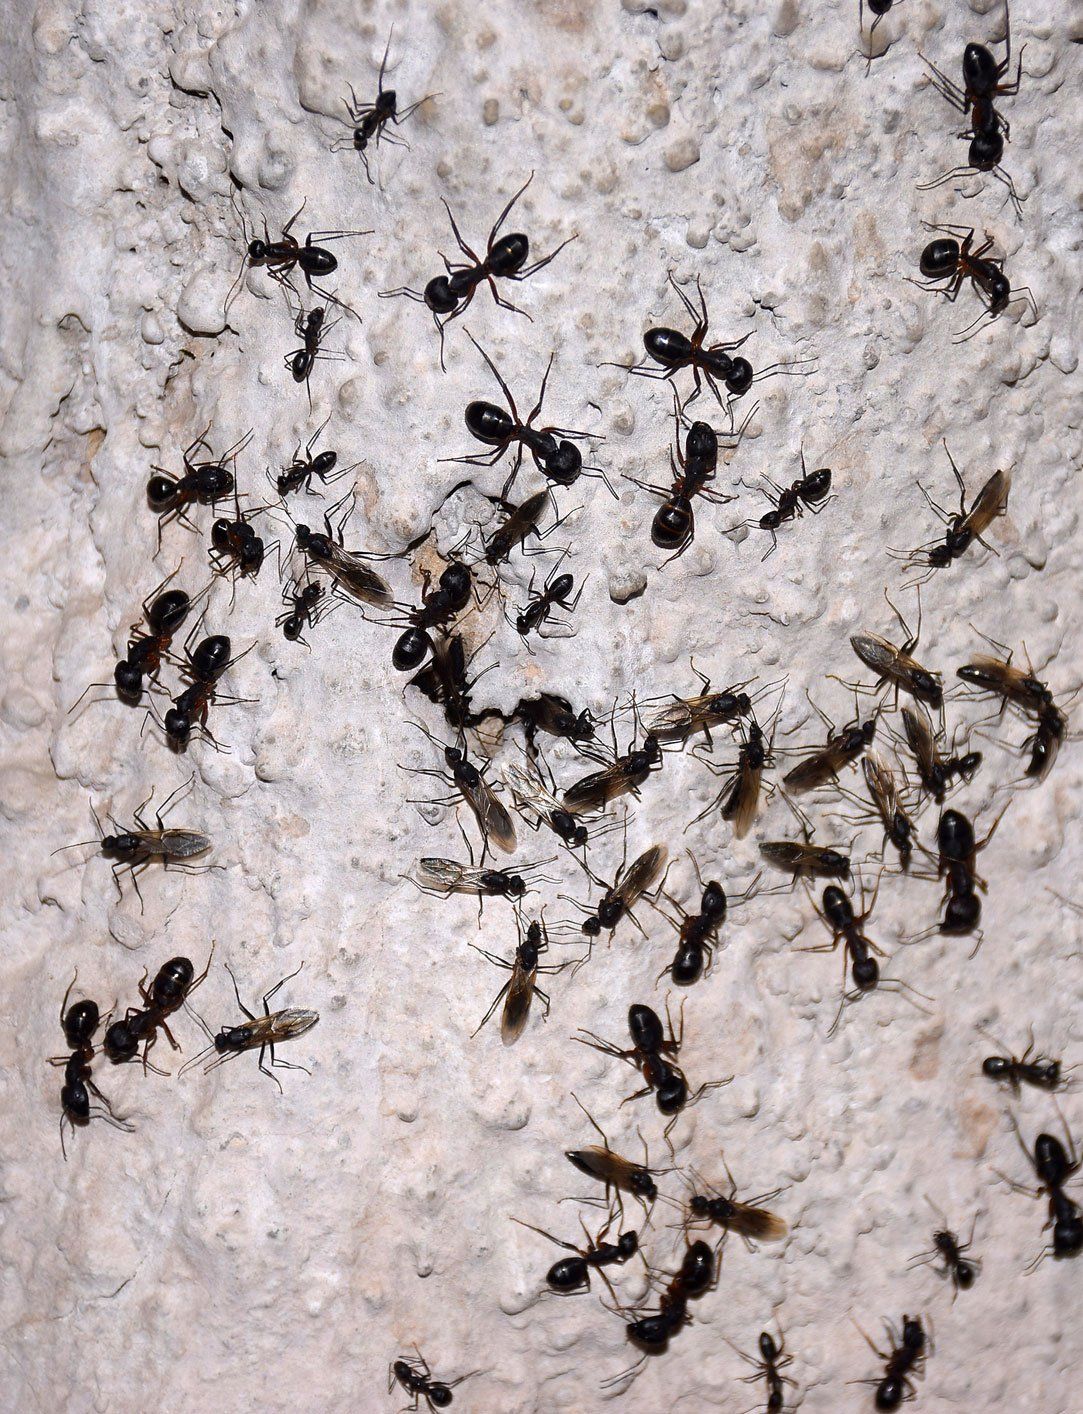 ants flock to the wall